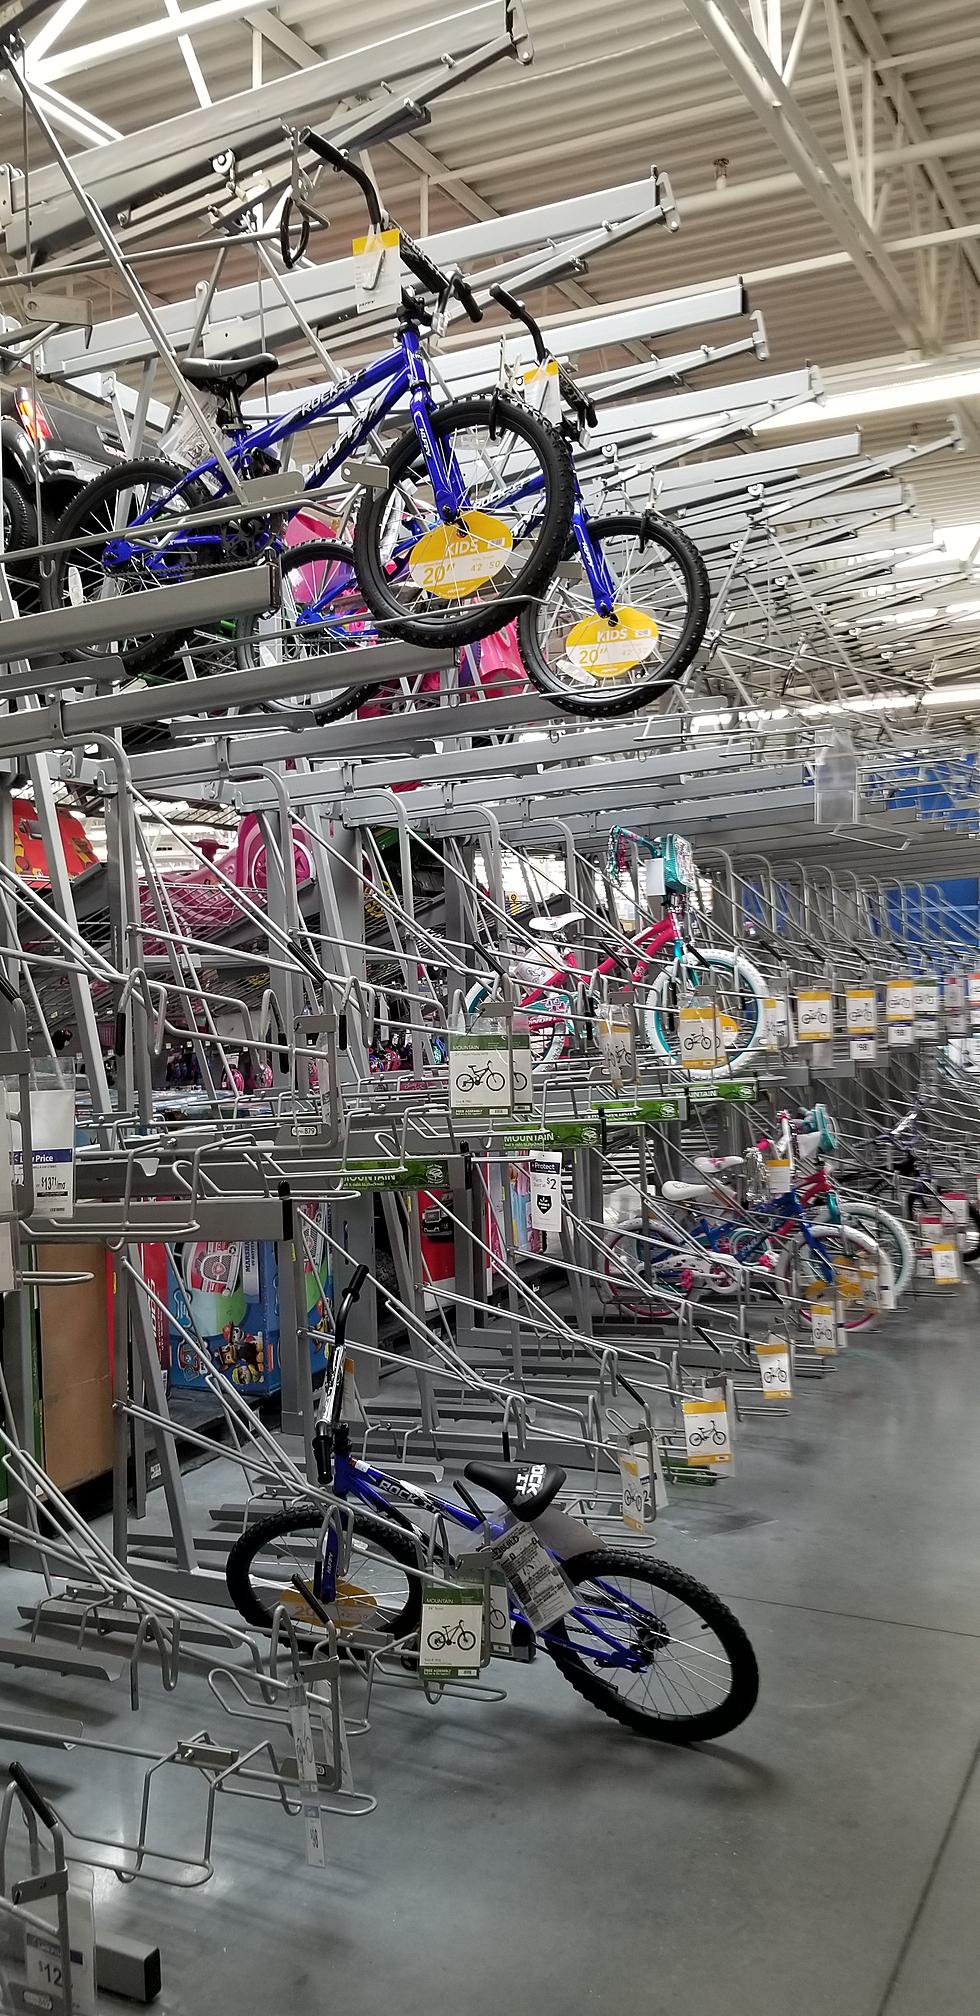 Major Shortages on Bikes, Boats, Cars and More in West Michigan